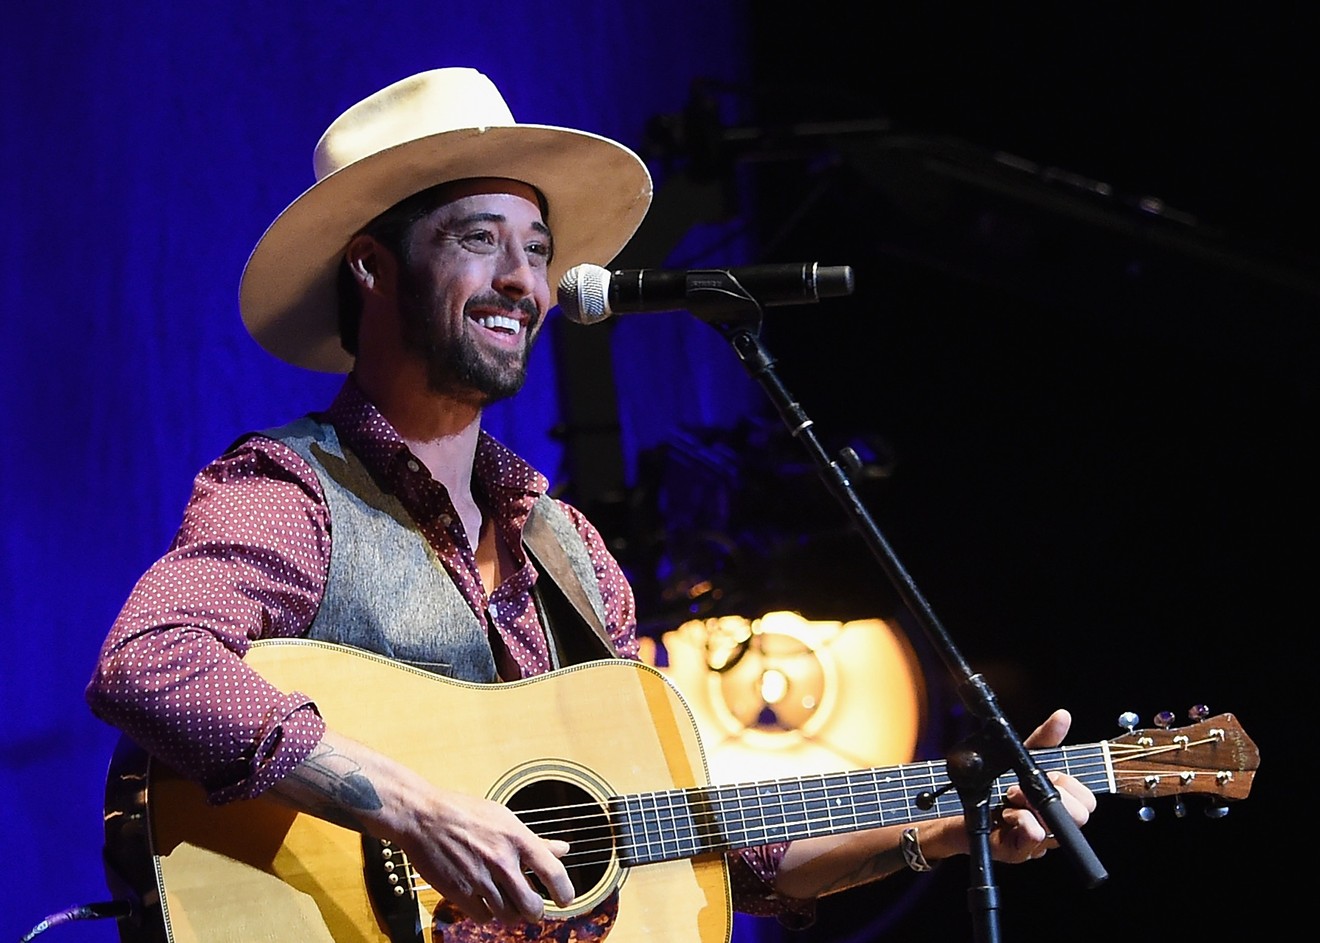 Ryan Bingham performs a solo acoustic set Saturday night at Will Rogers Auditorium in Fort Worth.